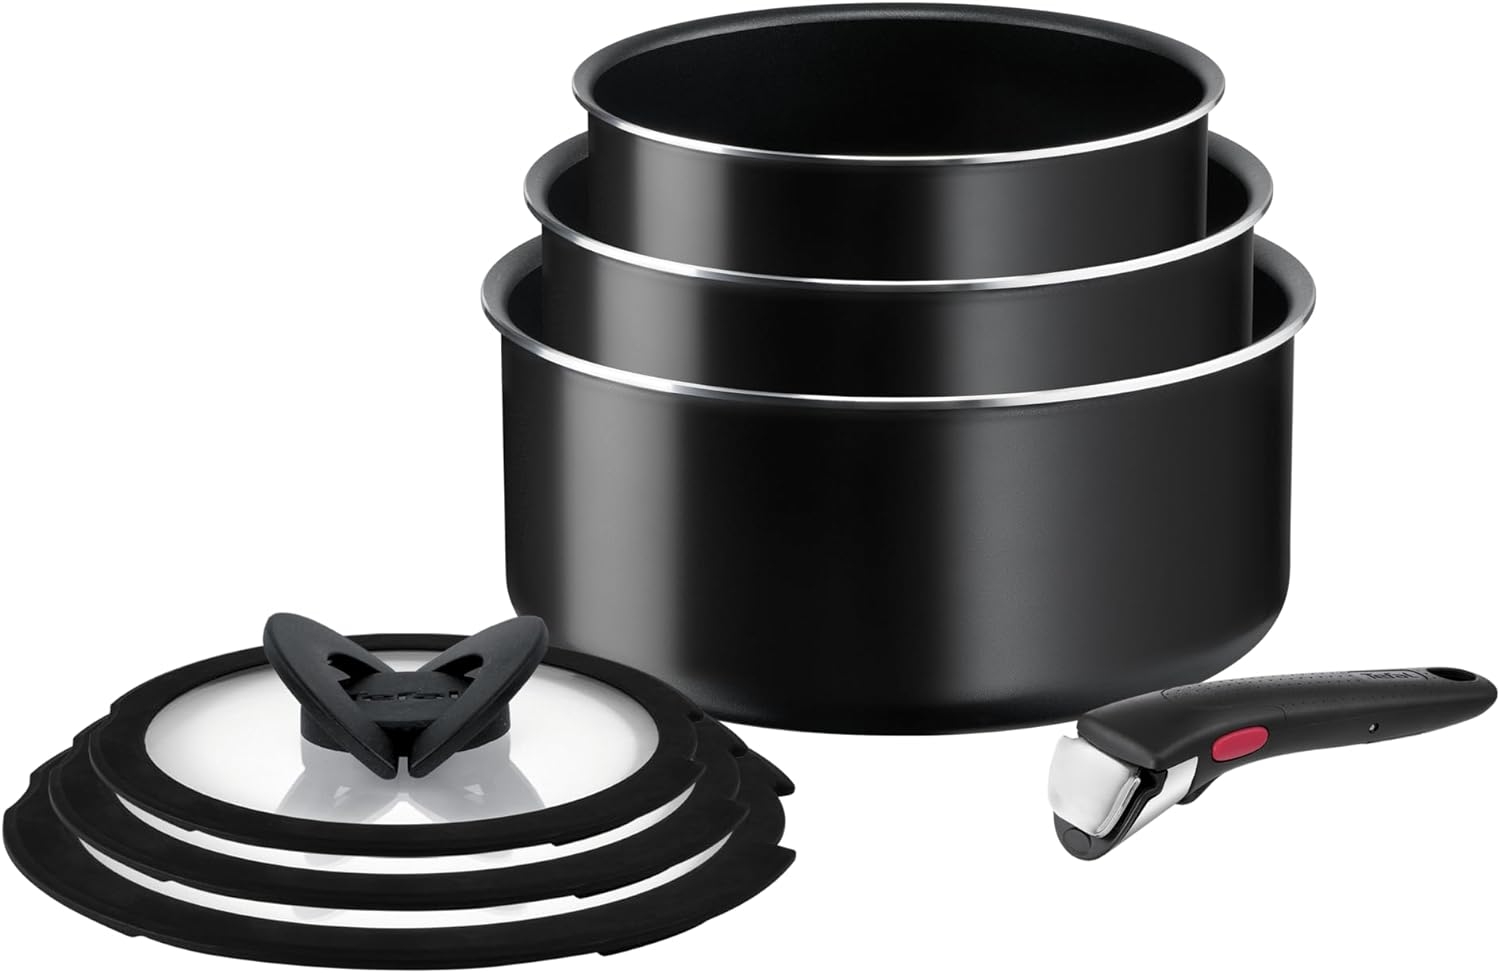  Stackable Cookware Set Nonstick 100% PFOA Free Induction Pots  and Pans Set Space Saving with Cooking Utensils 13 Piece (Solid Black):  Home & Kitchen